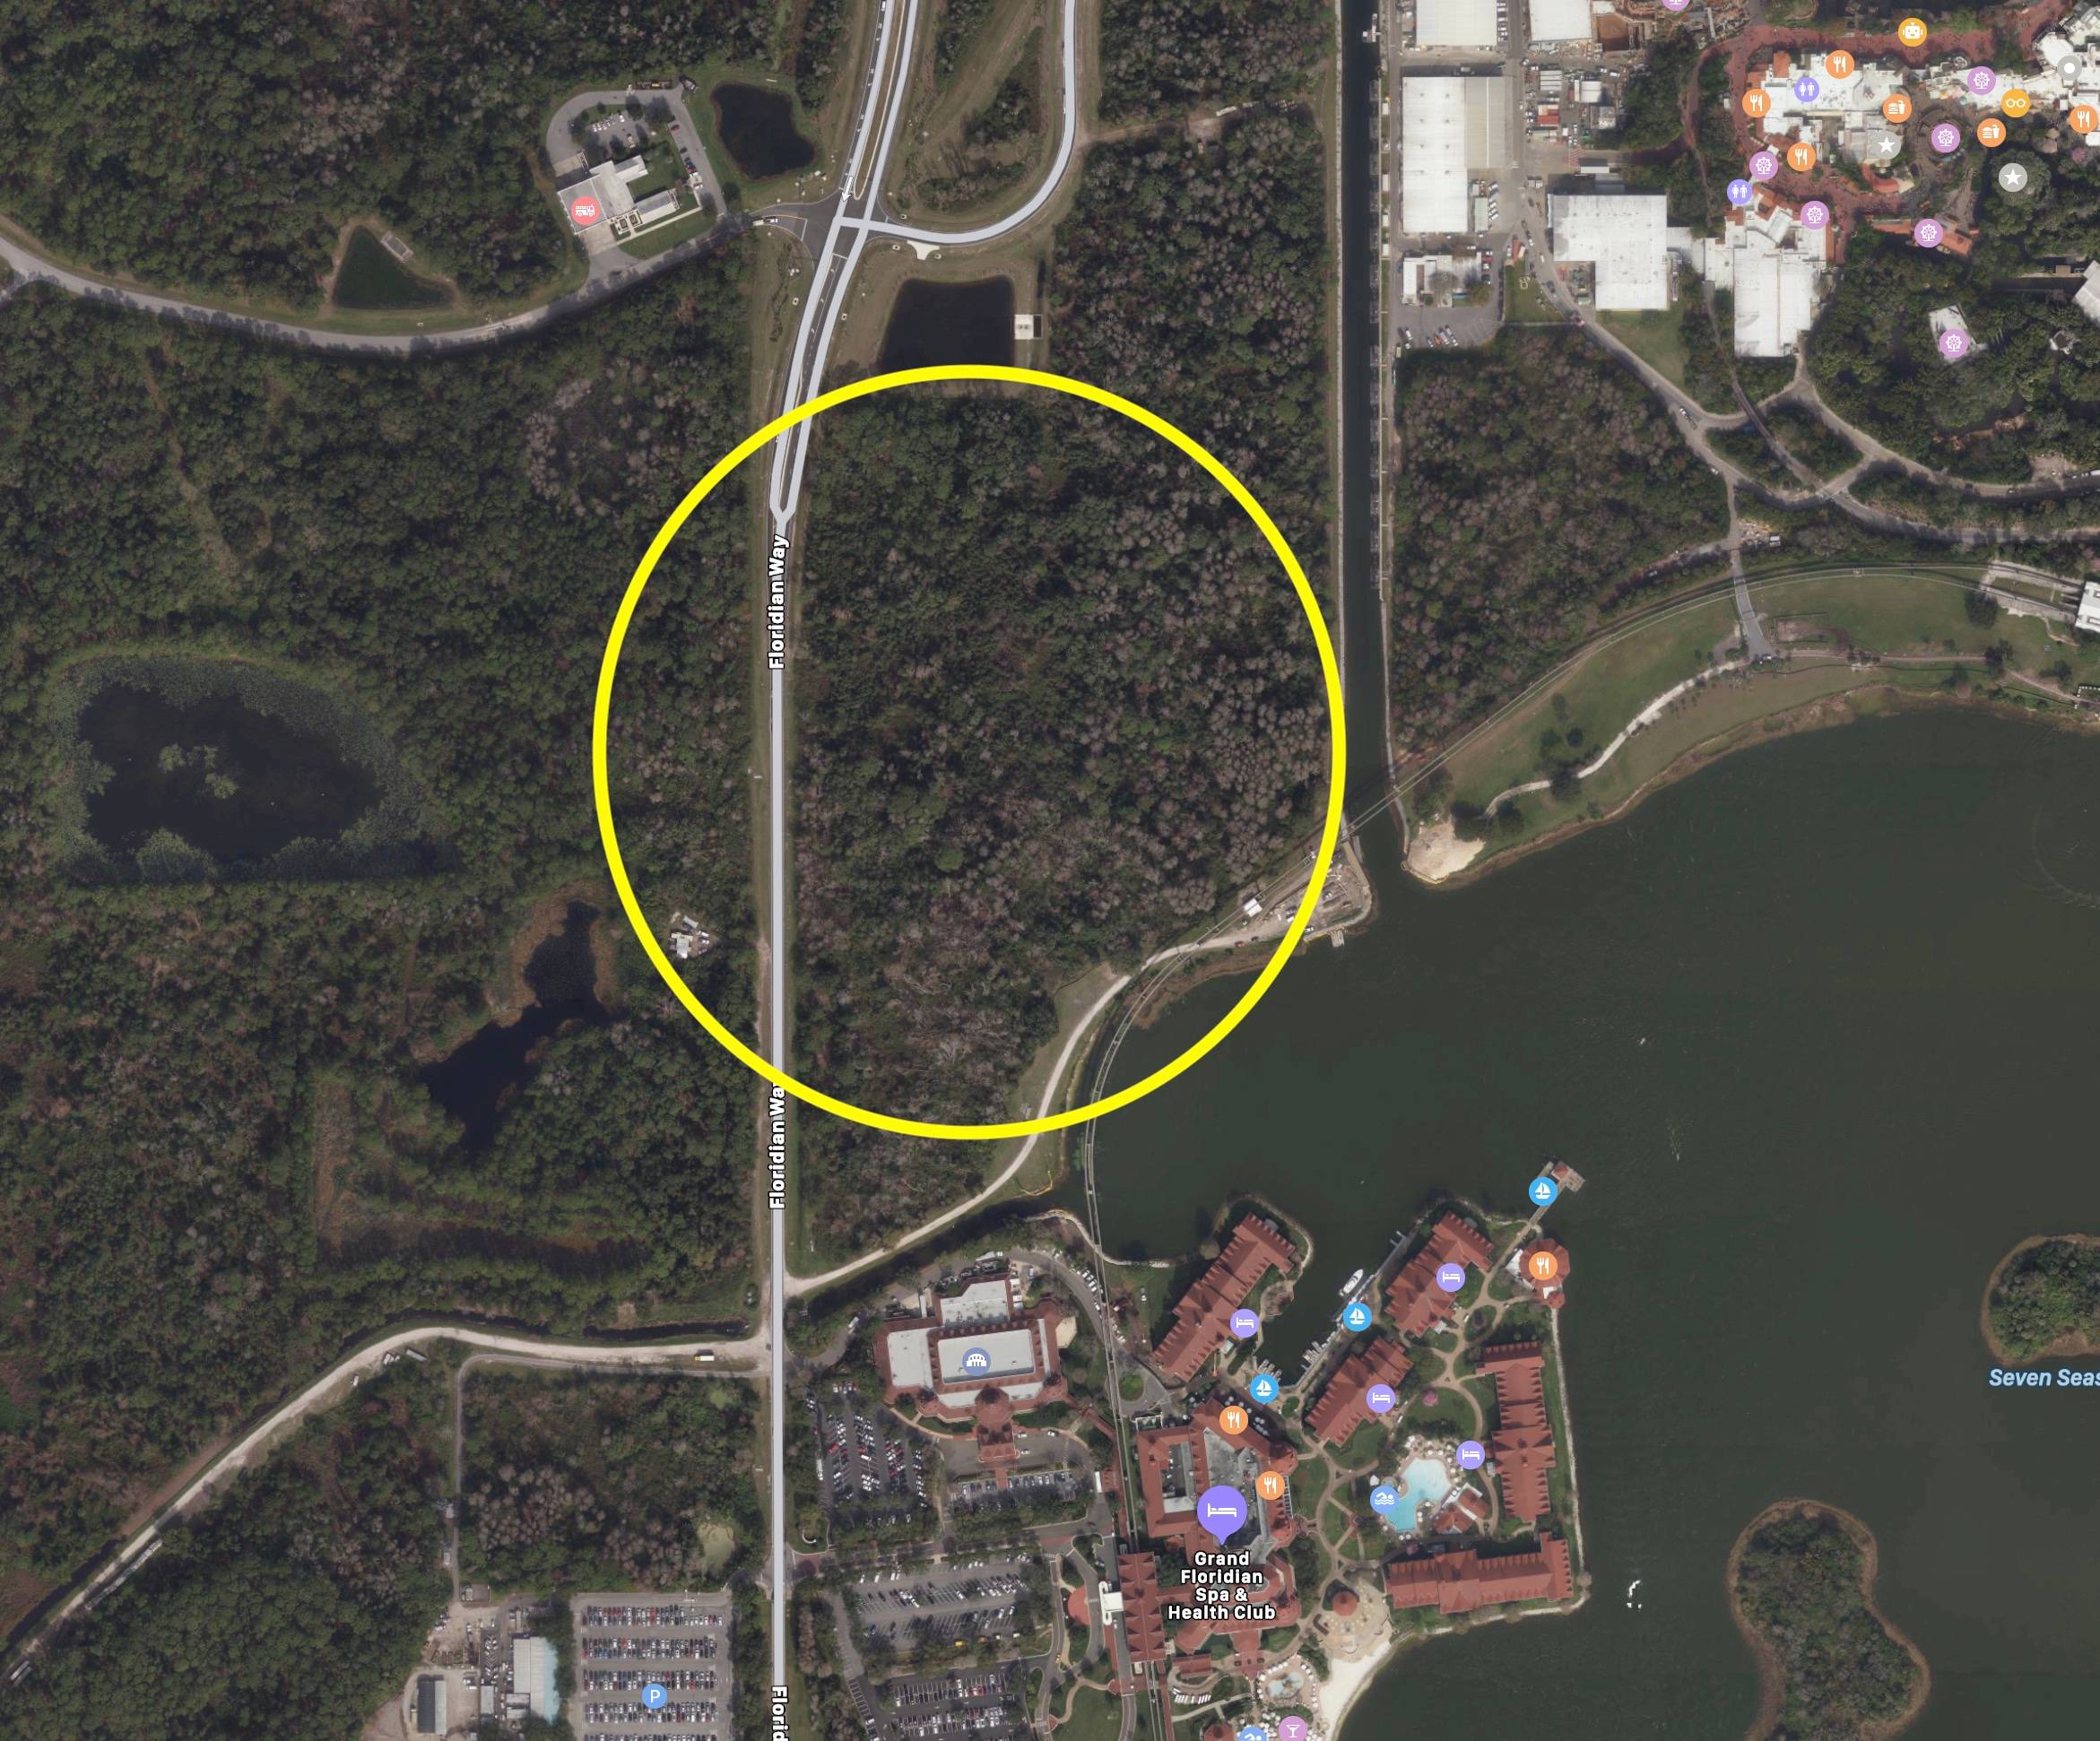 New Disney World permit shows plans to re-route Floridian Way and raises questions on future expansion near to Magic Kingdom